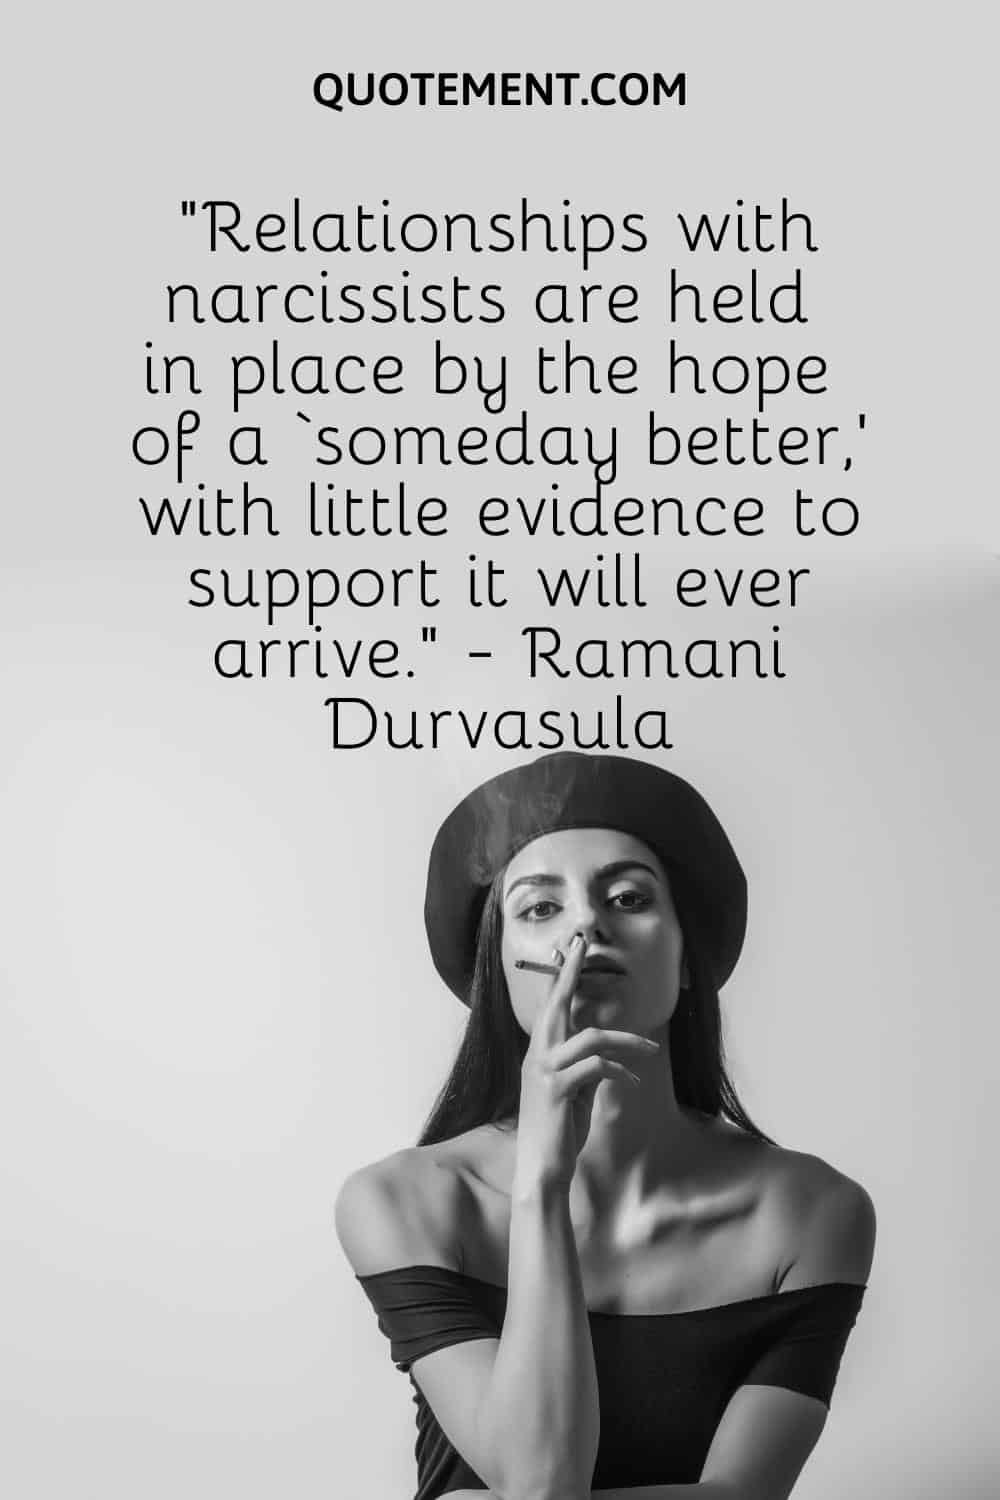 Relationships with narcissists are held in place by the hope of a ‘someday better,’ with little evidence to support it will ever arrive